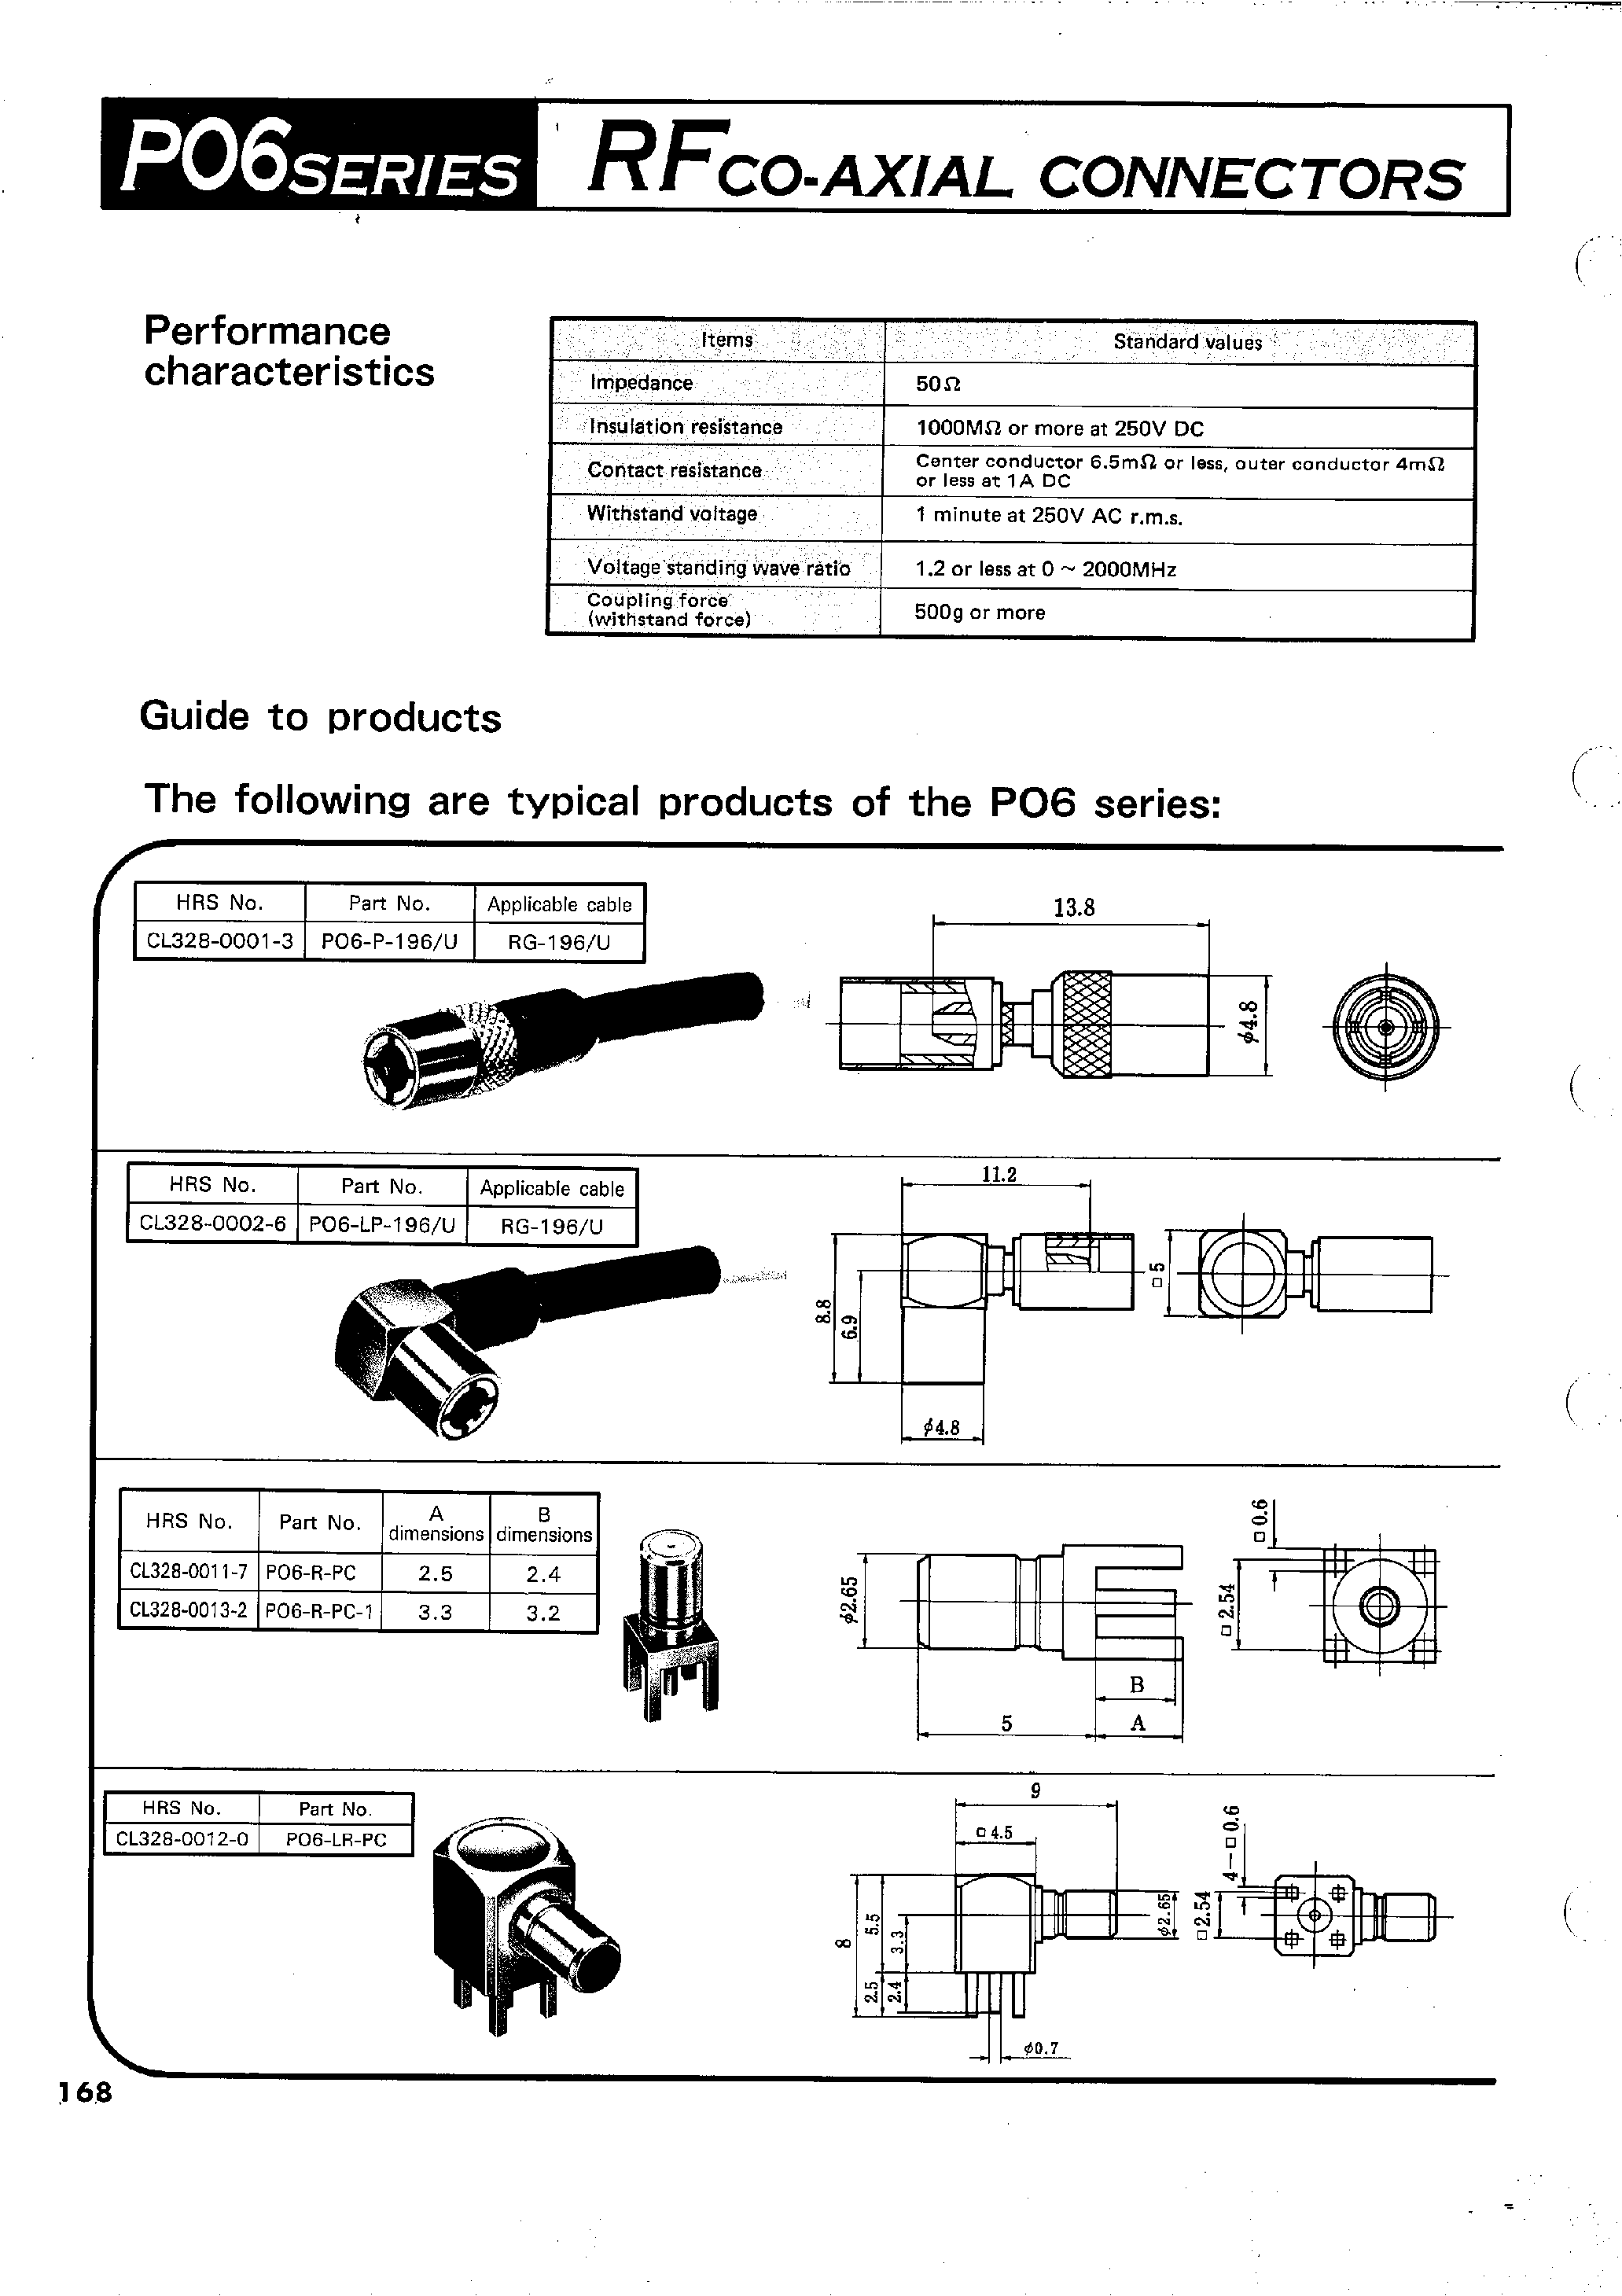 Datasheet PO6-A-JJ - RFCO-AXIAL CONNECTORS(Low-profile ultrasmall coaxial connector) page 2